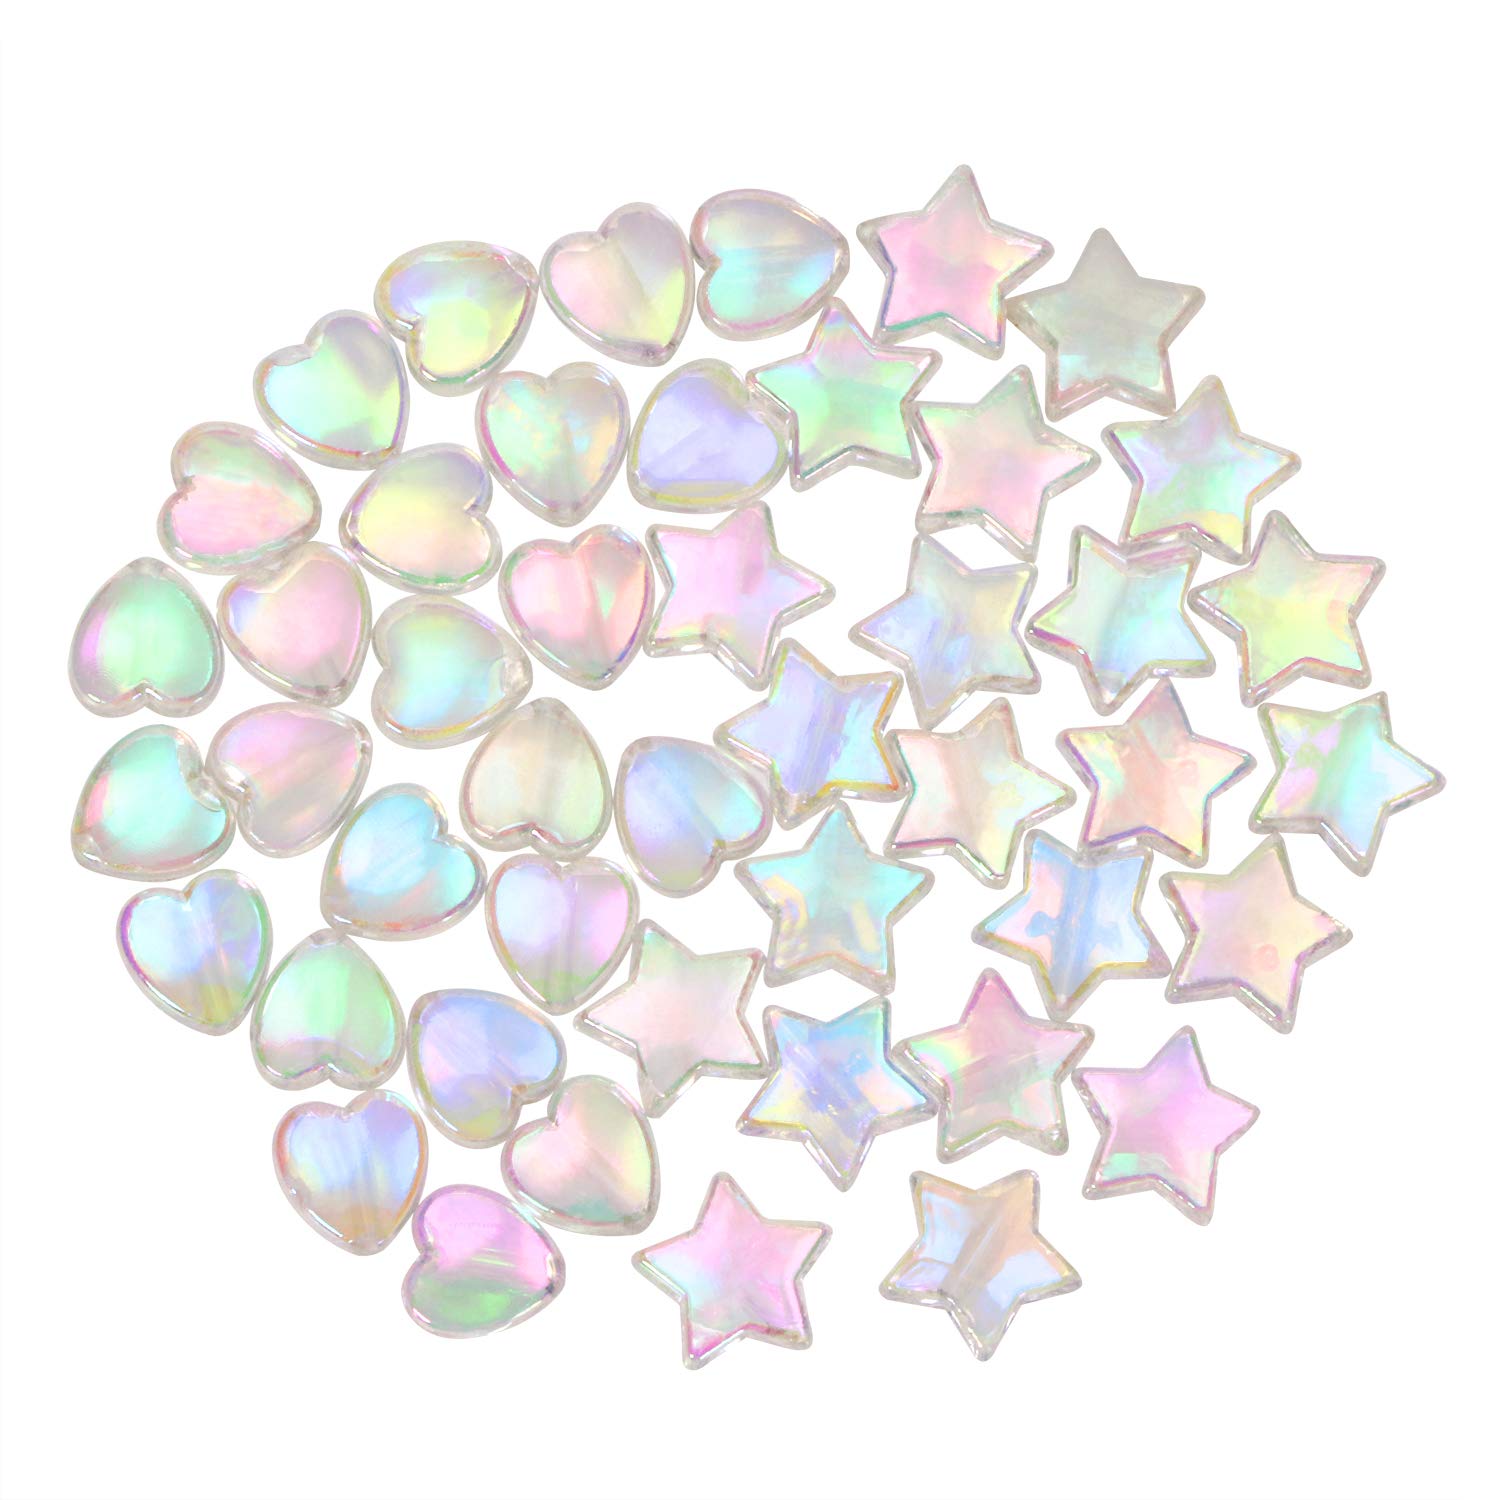 50pcs Small Star Charms Pendant DIY Jewelry Making Accessories